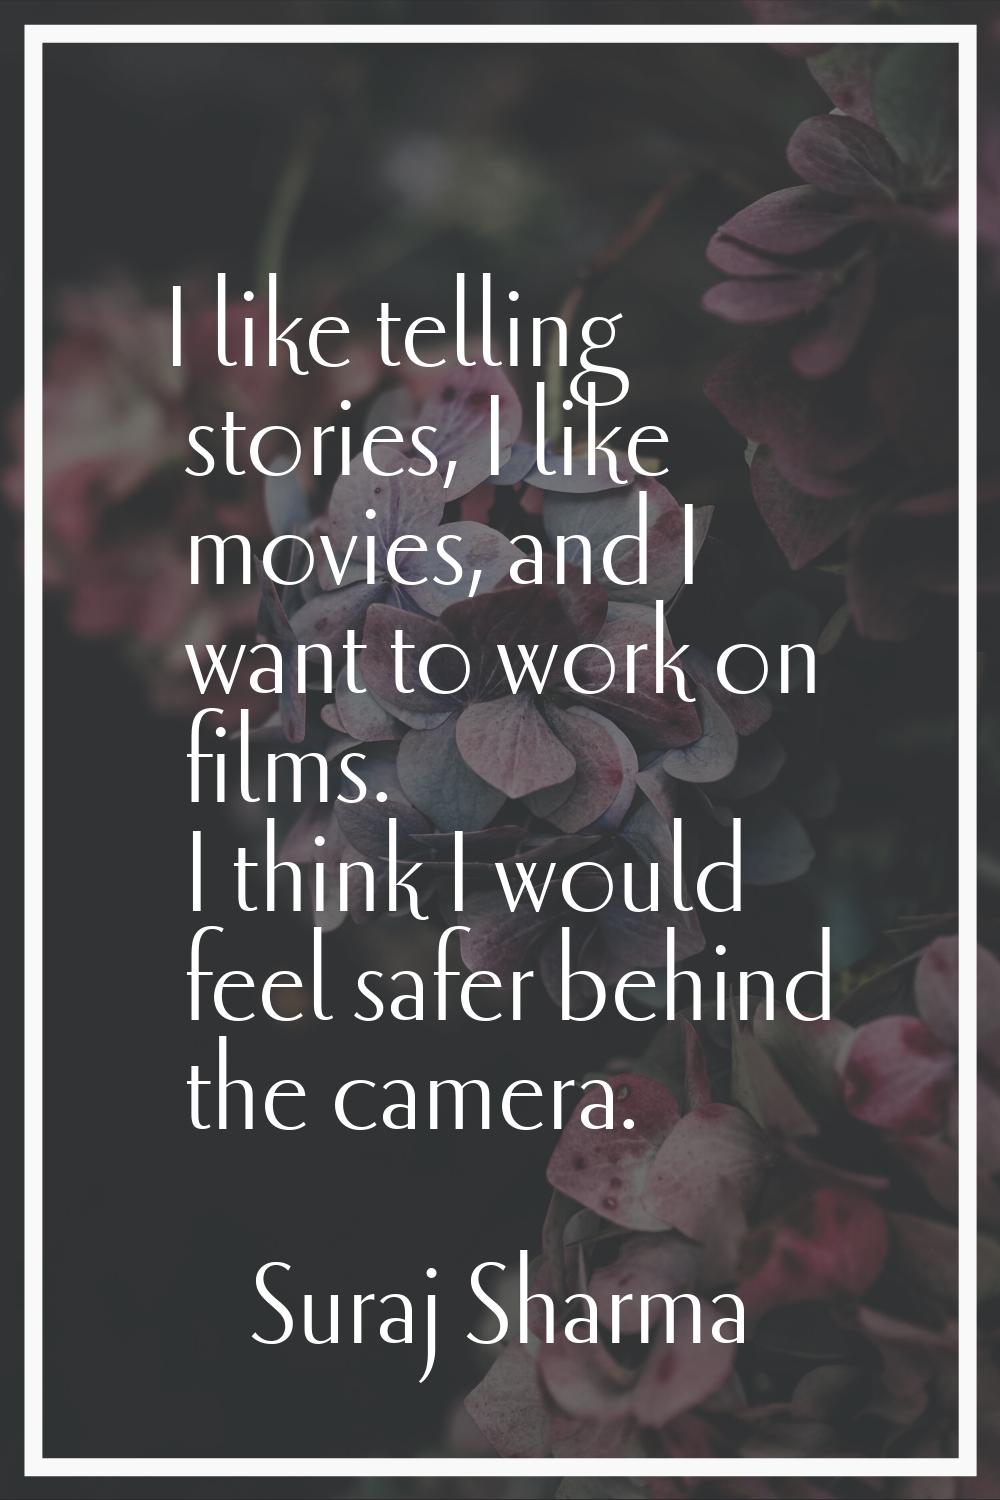 I like telling stories, I like movies, and I want to work on films. I think I would feel safer behi